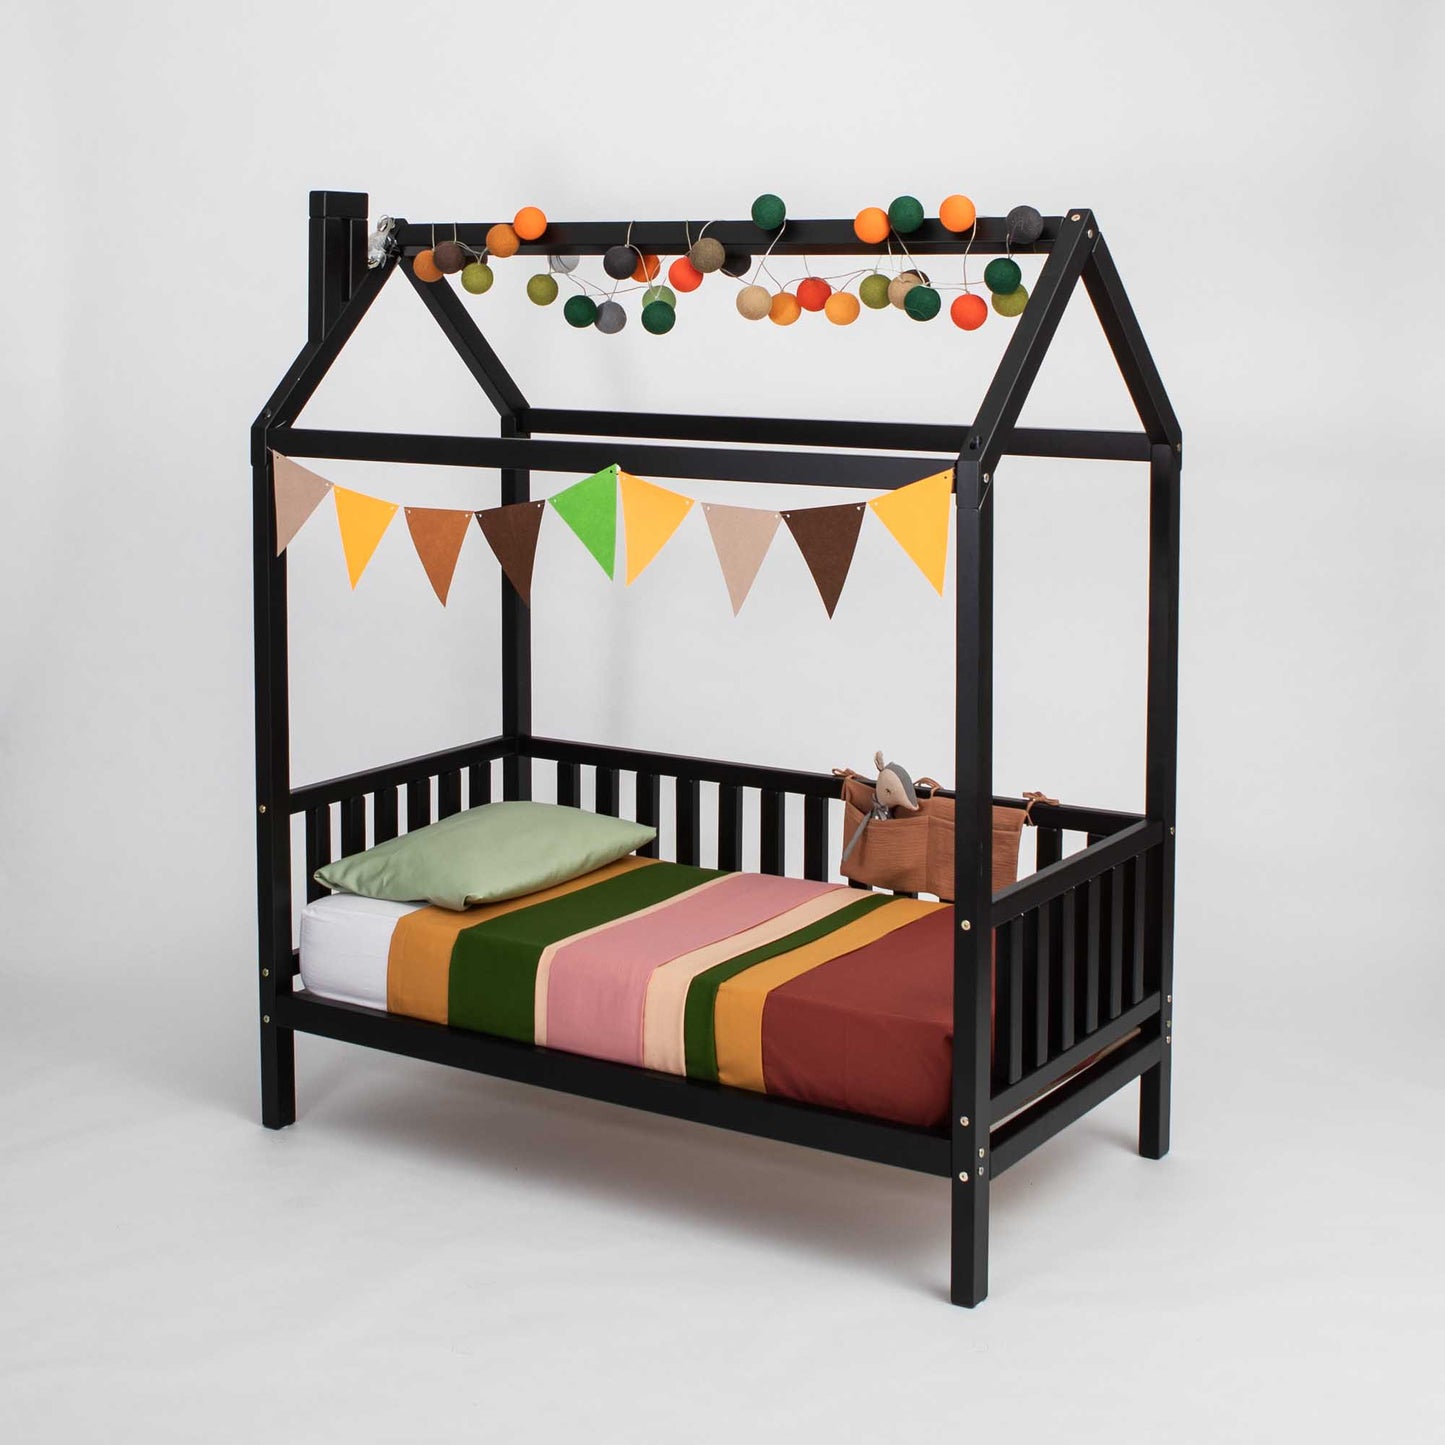 A raised house bed on legs with 3-sided rails for children with a black canopy and bunting.